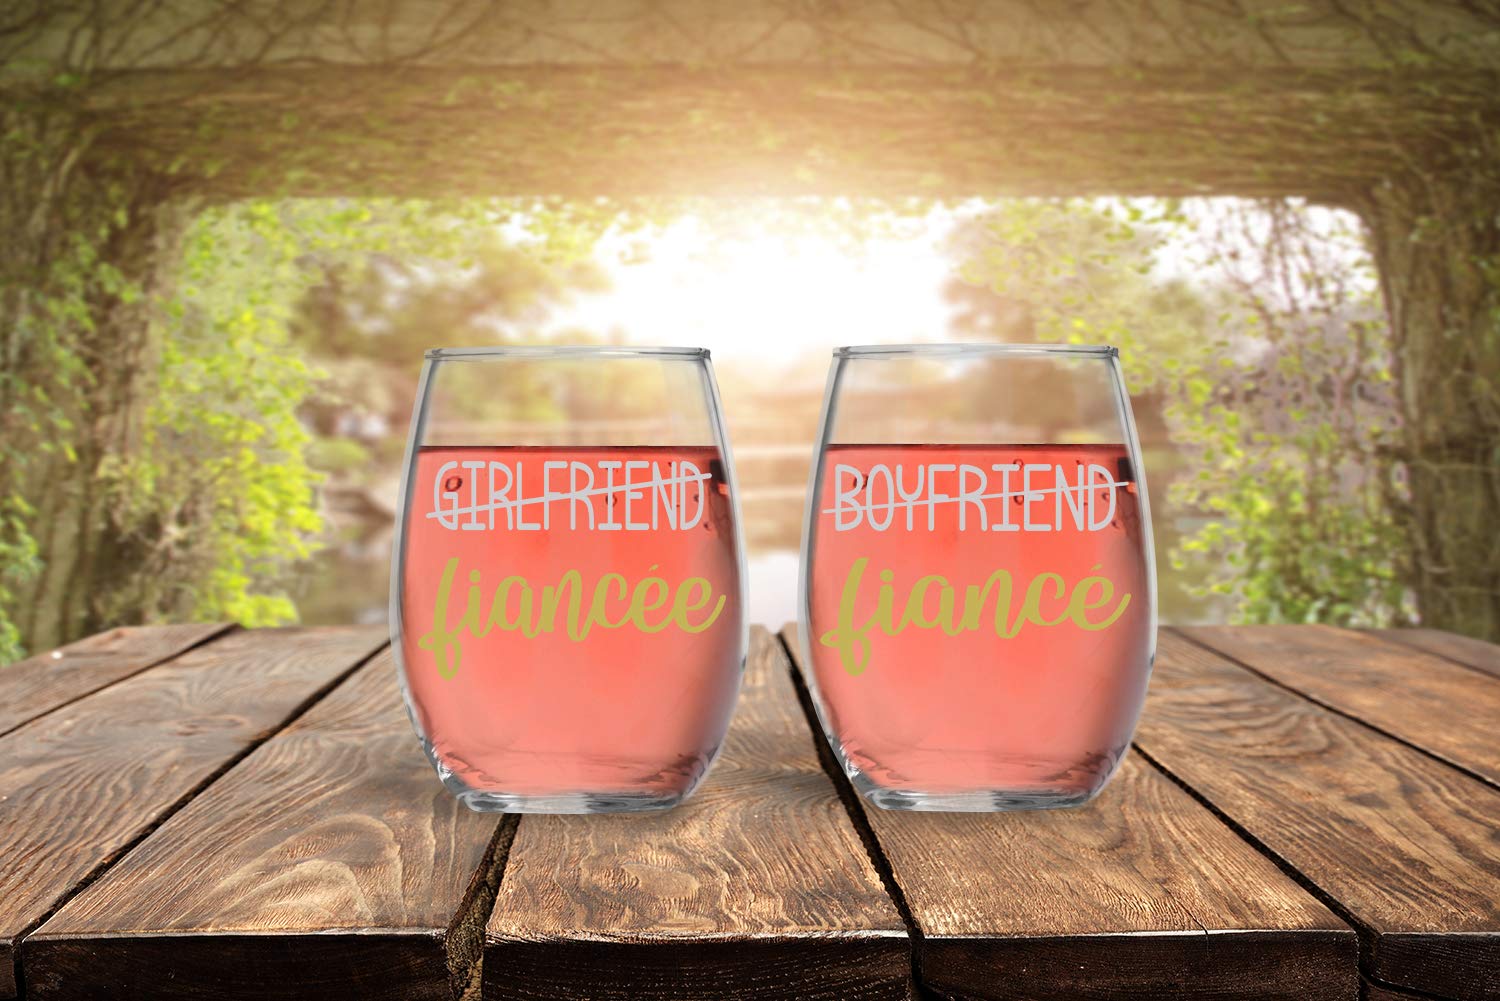 Boyfriend/Fiance - Girlfriend/Fiancee - Funny 15oz Crystal Wine Glass - Stemless Wine Glass Couples Sets - Perfect idea for Bridal and Engagement Gifts